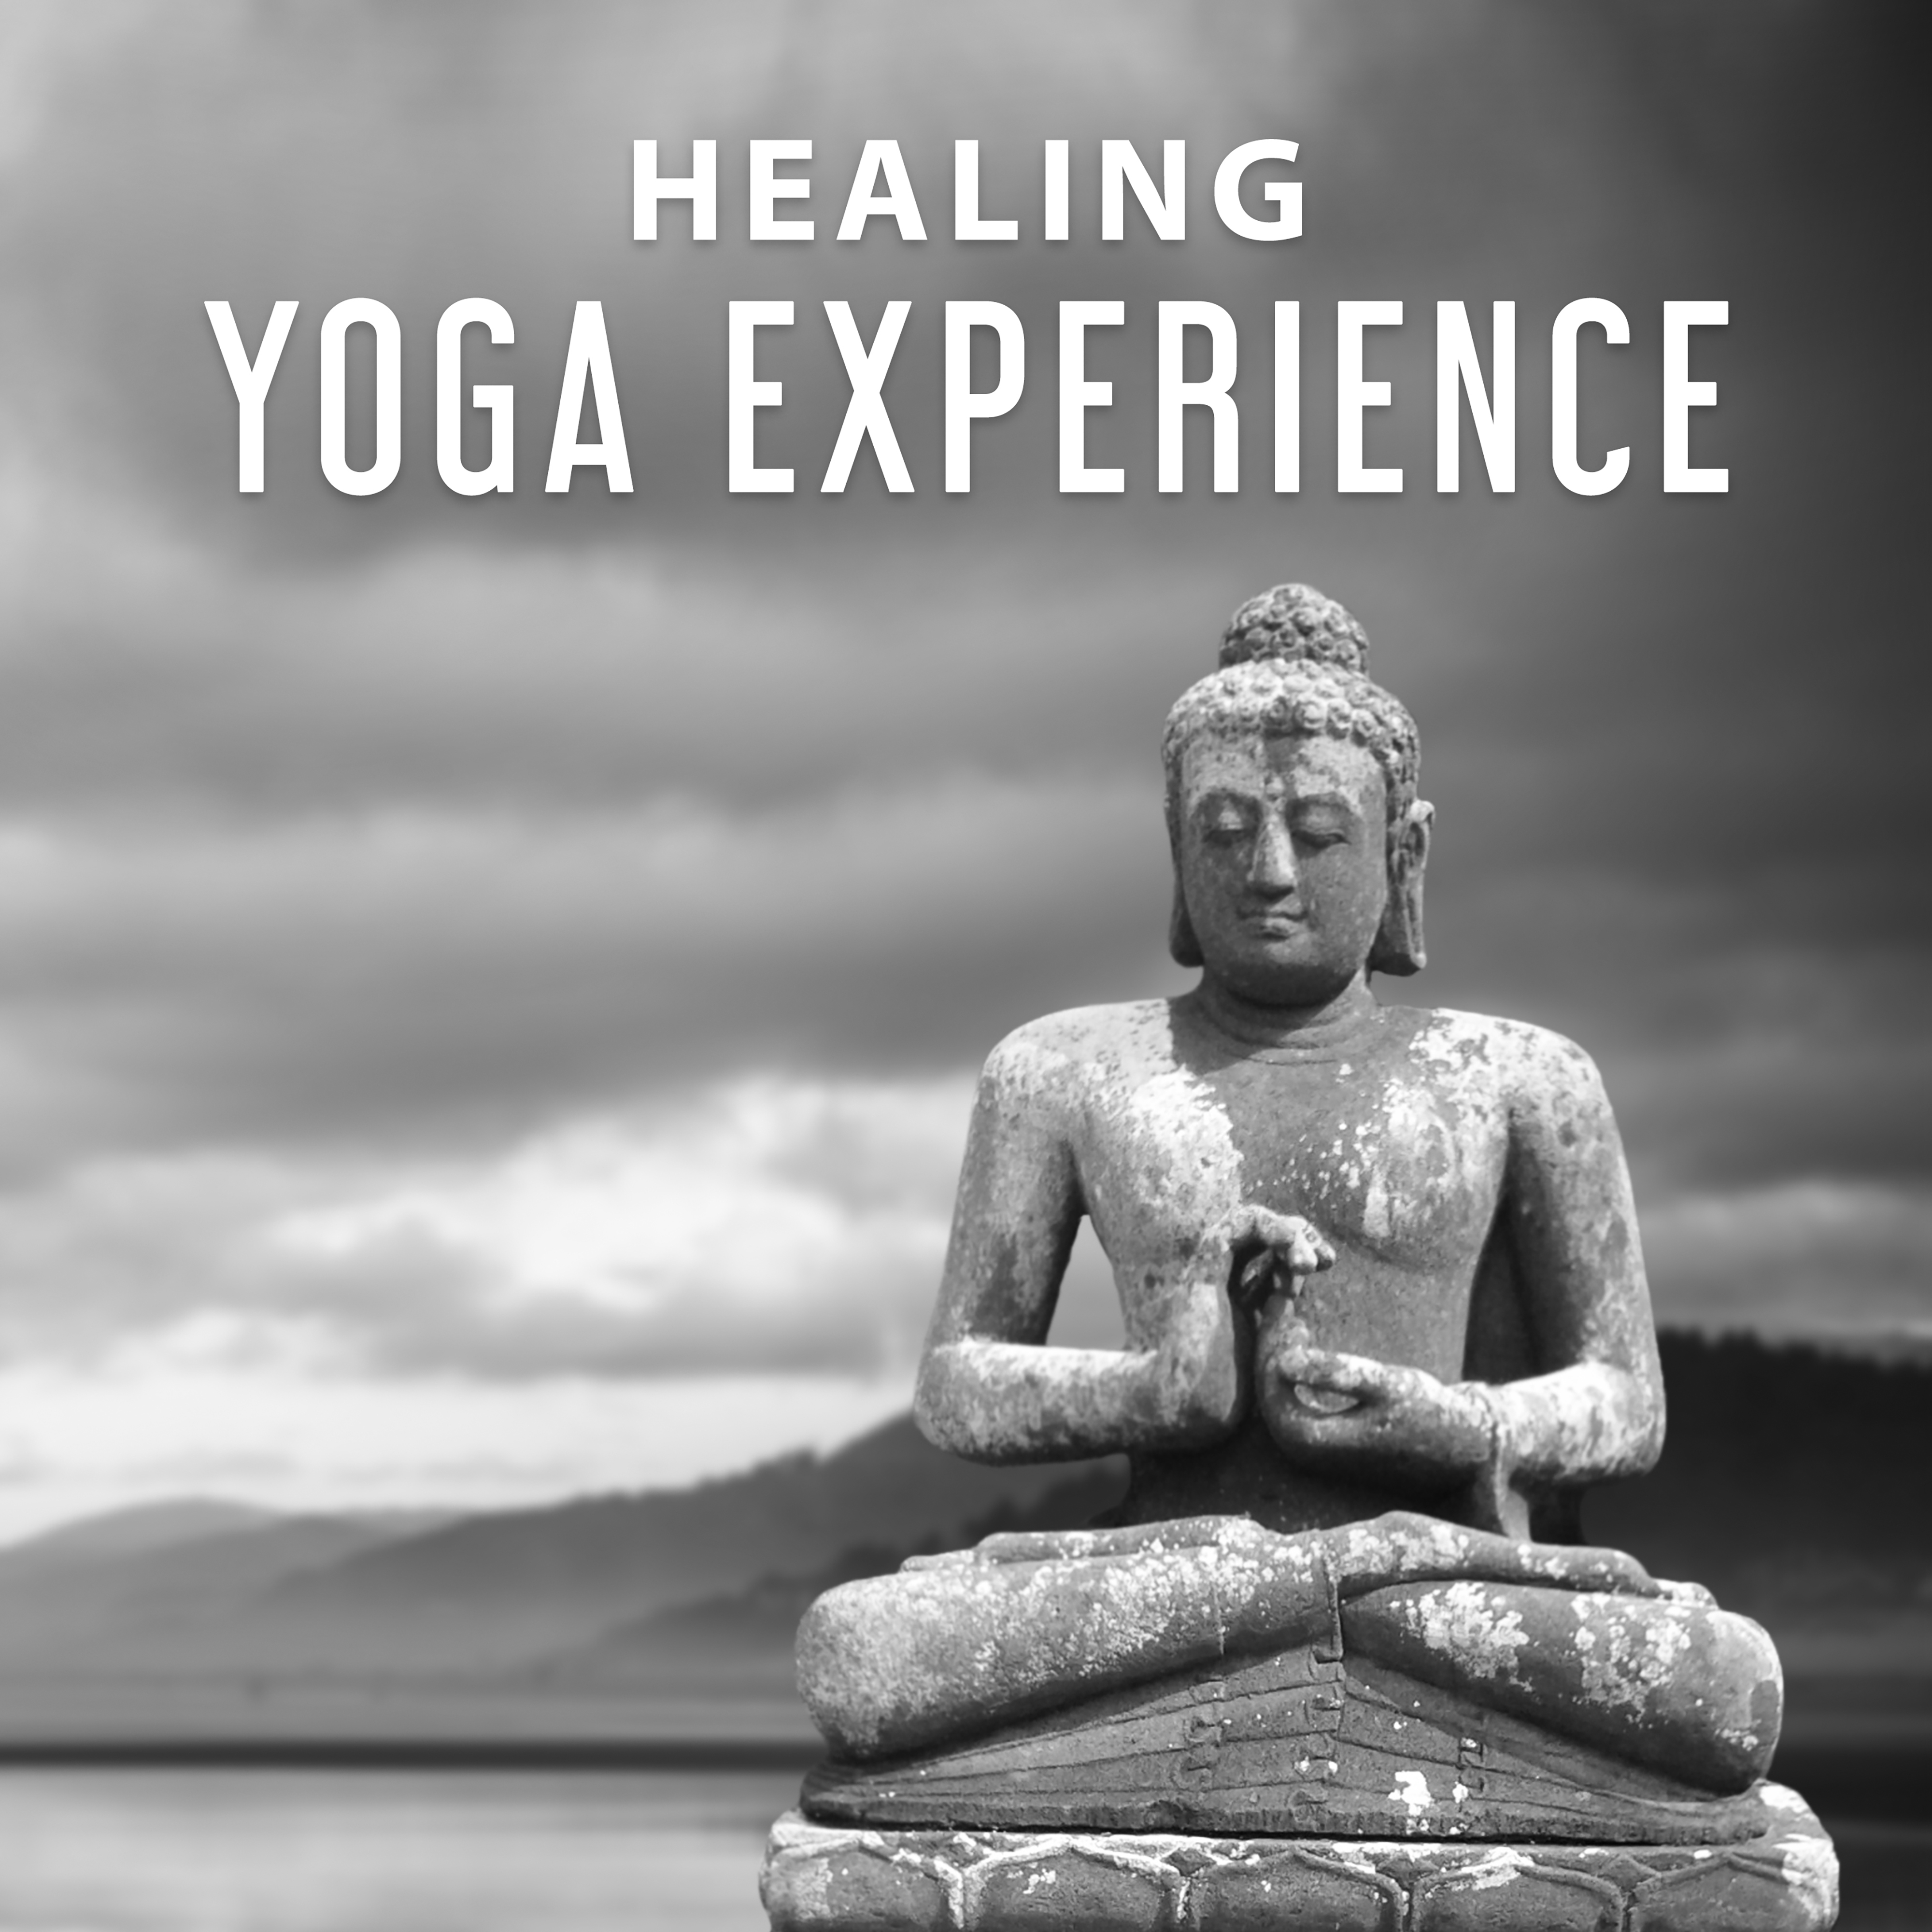 Healing Yoga Experience – Yoga for Healing, Clear Your Mind, Soothe Your Soul, Kundalini Healing